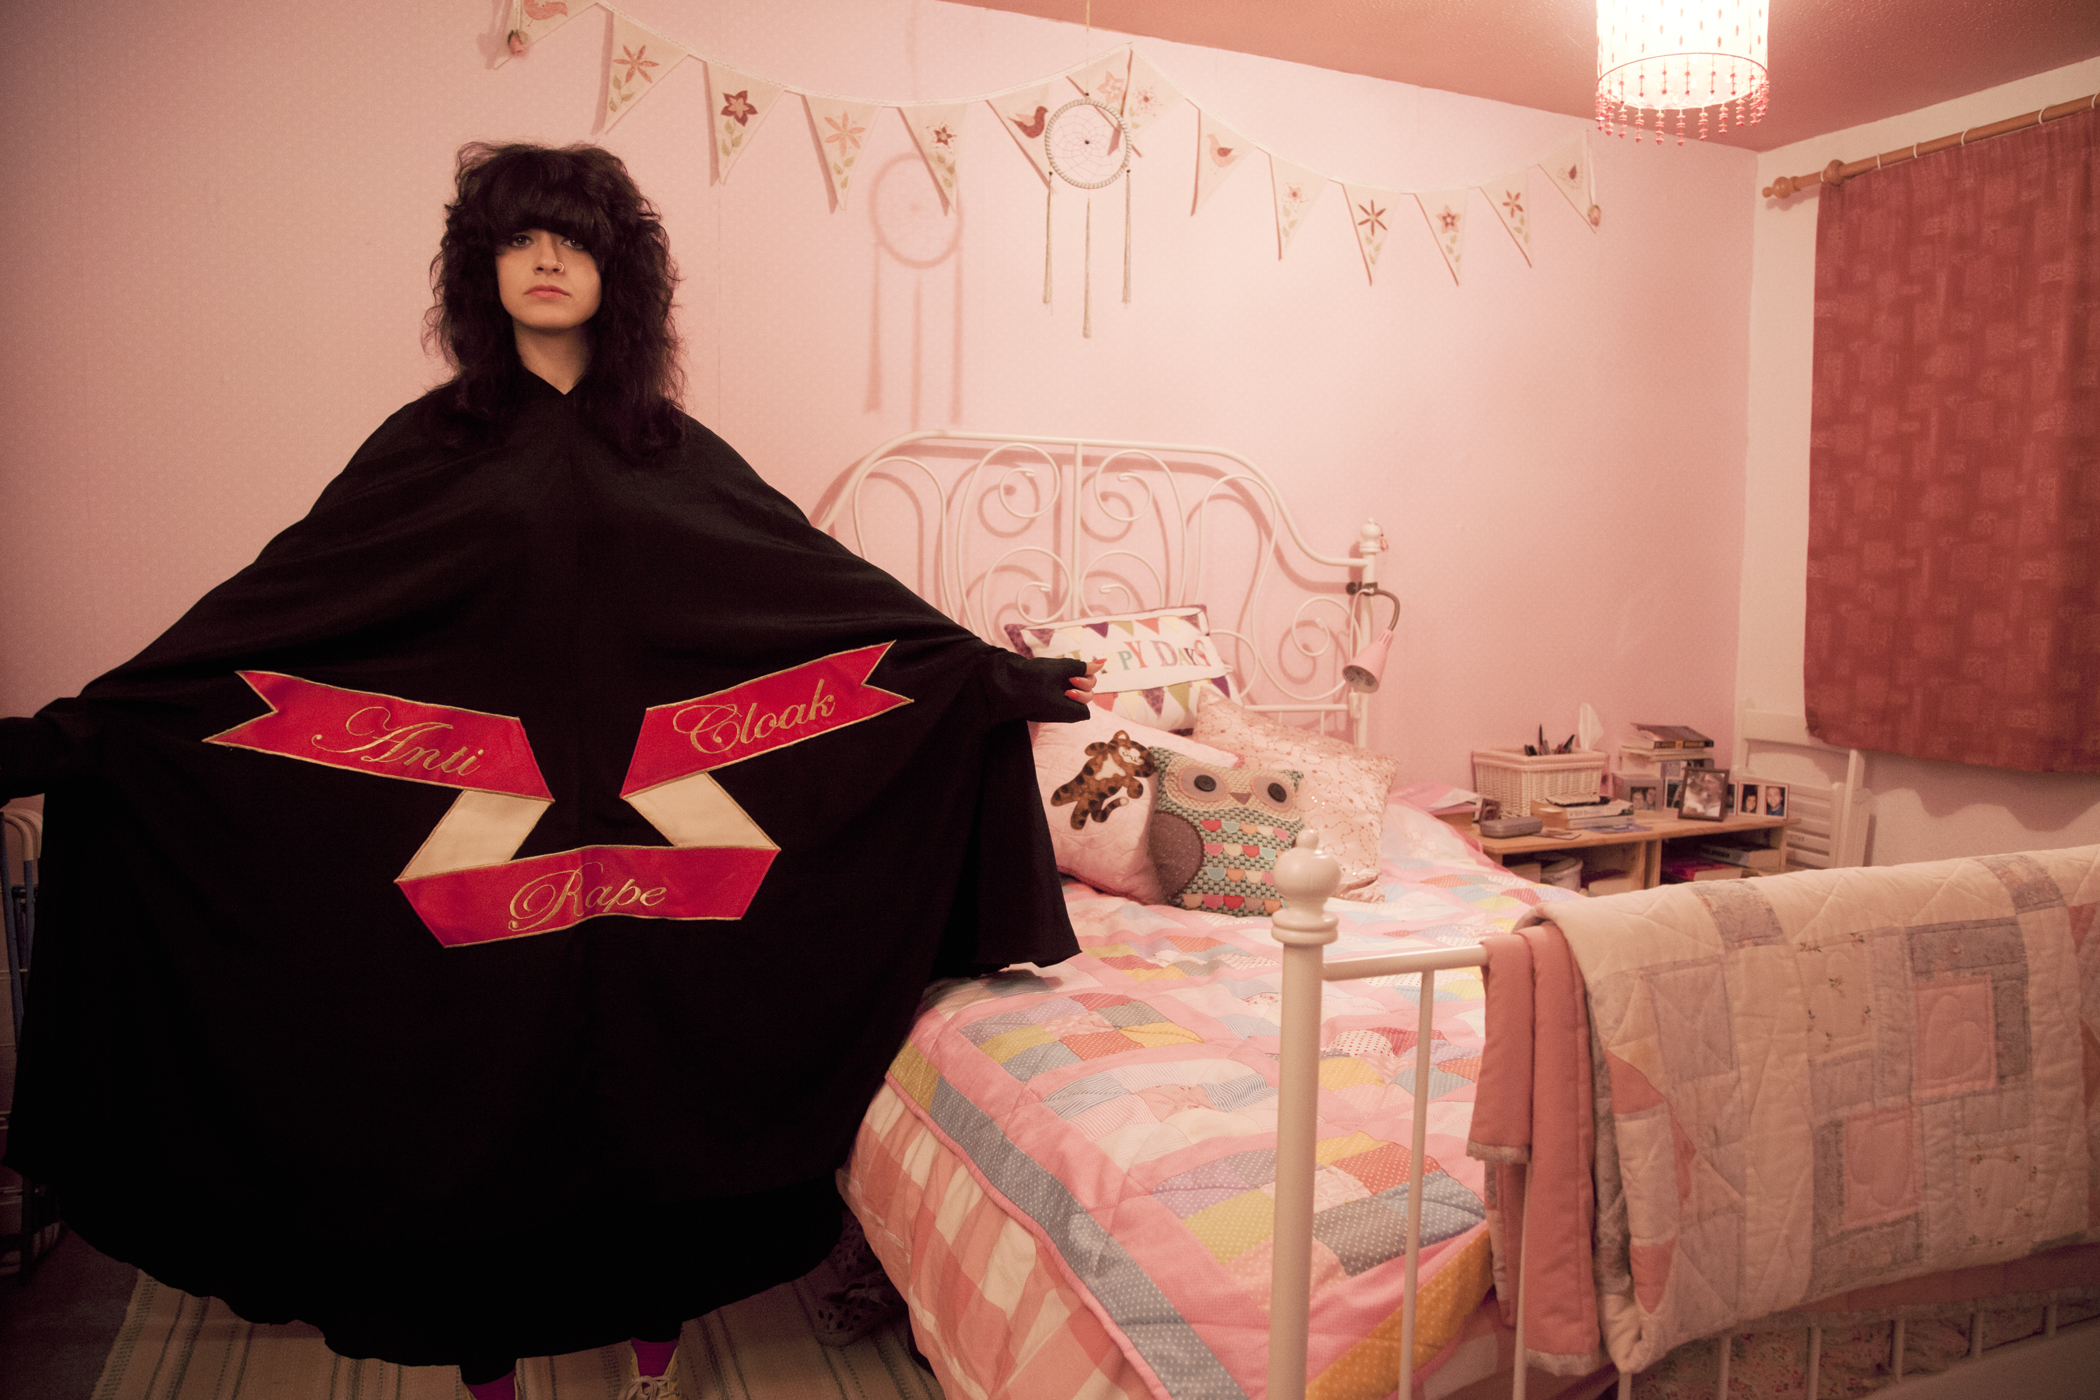 Sarah Maple, Bedroom Cloak, 2015. C-type matt photograph, 15.75 x 23.5 inches. Maple spreads her arms wide to show the text of her “Anti-Rape Cloak” as she stands in a pink bedroom. Photo courtesy of the Ukrainian Institute of Modern Art.